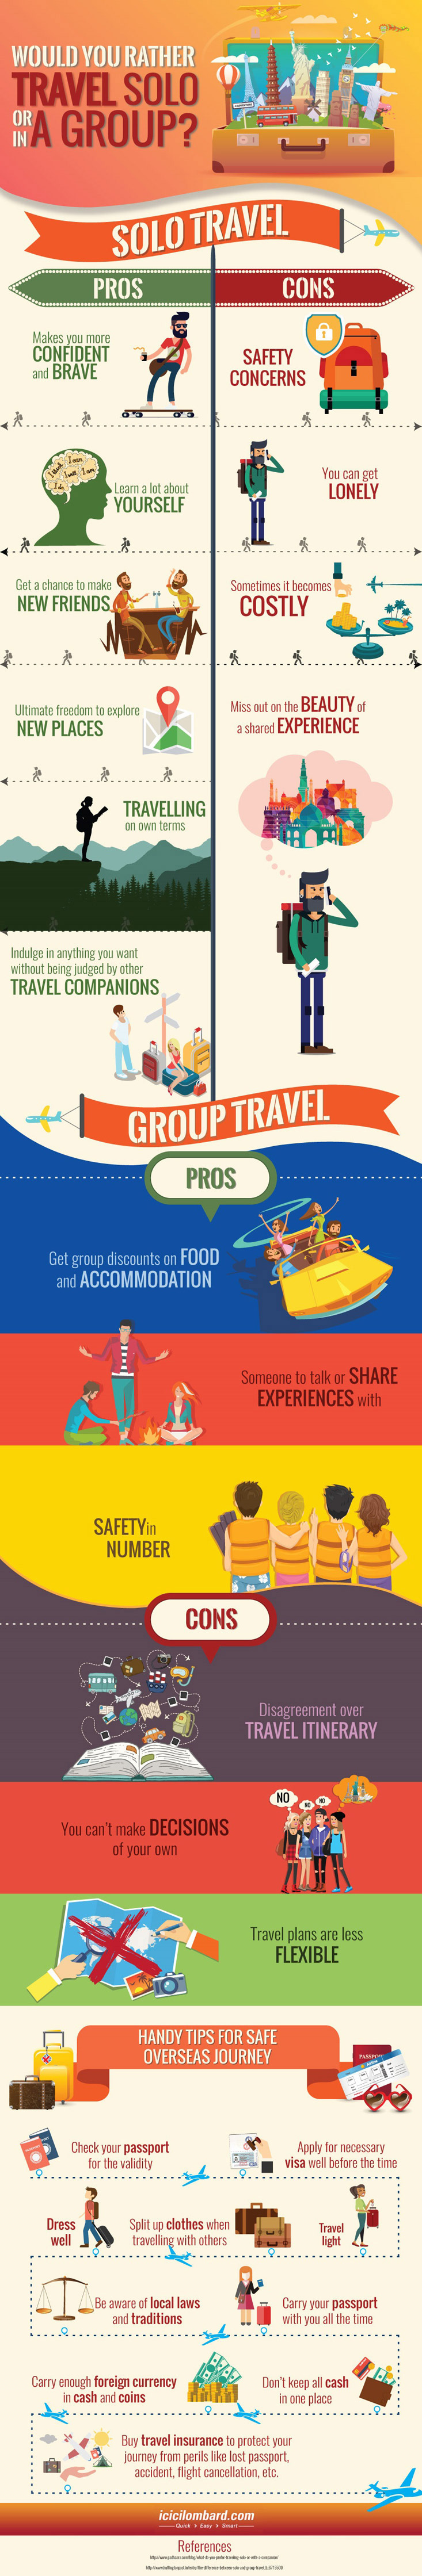  Pros and Cons of Group vs Solo Travel